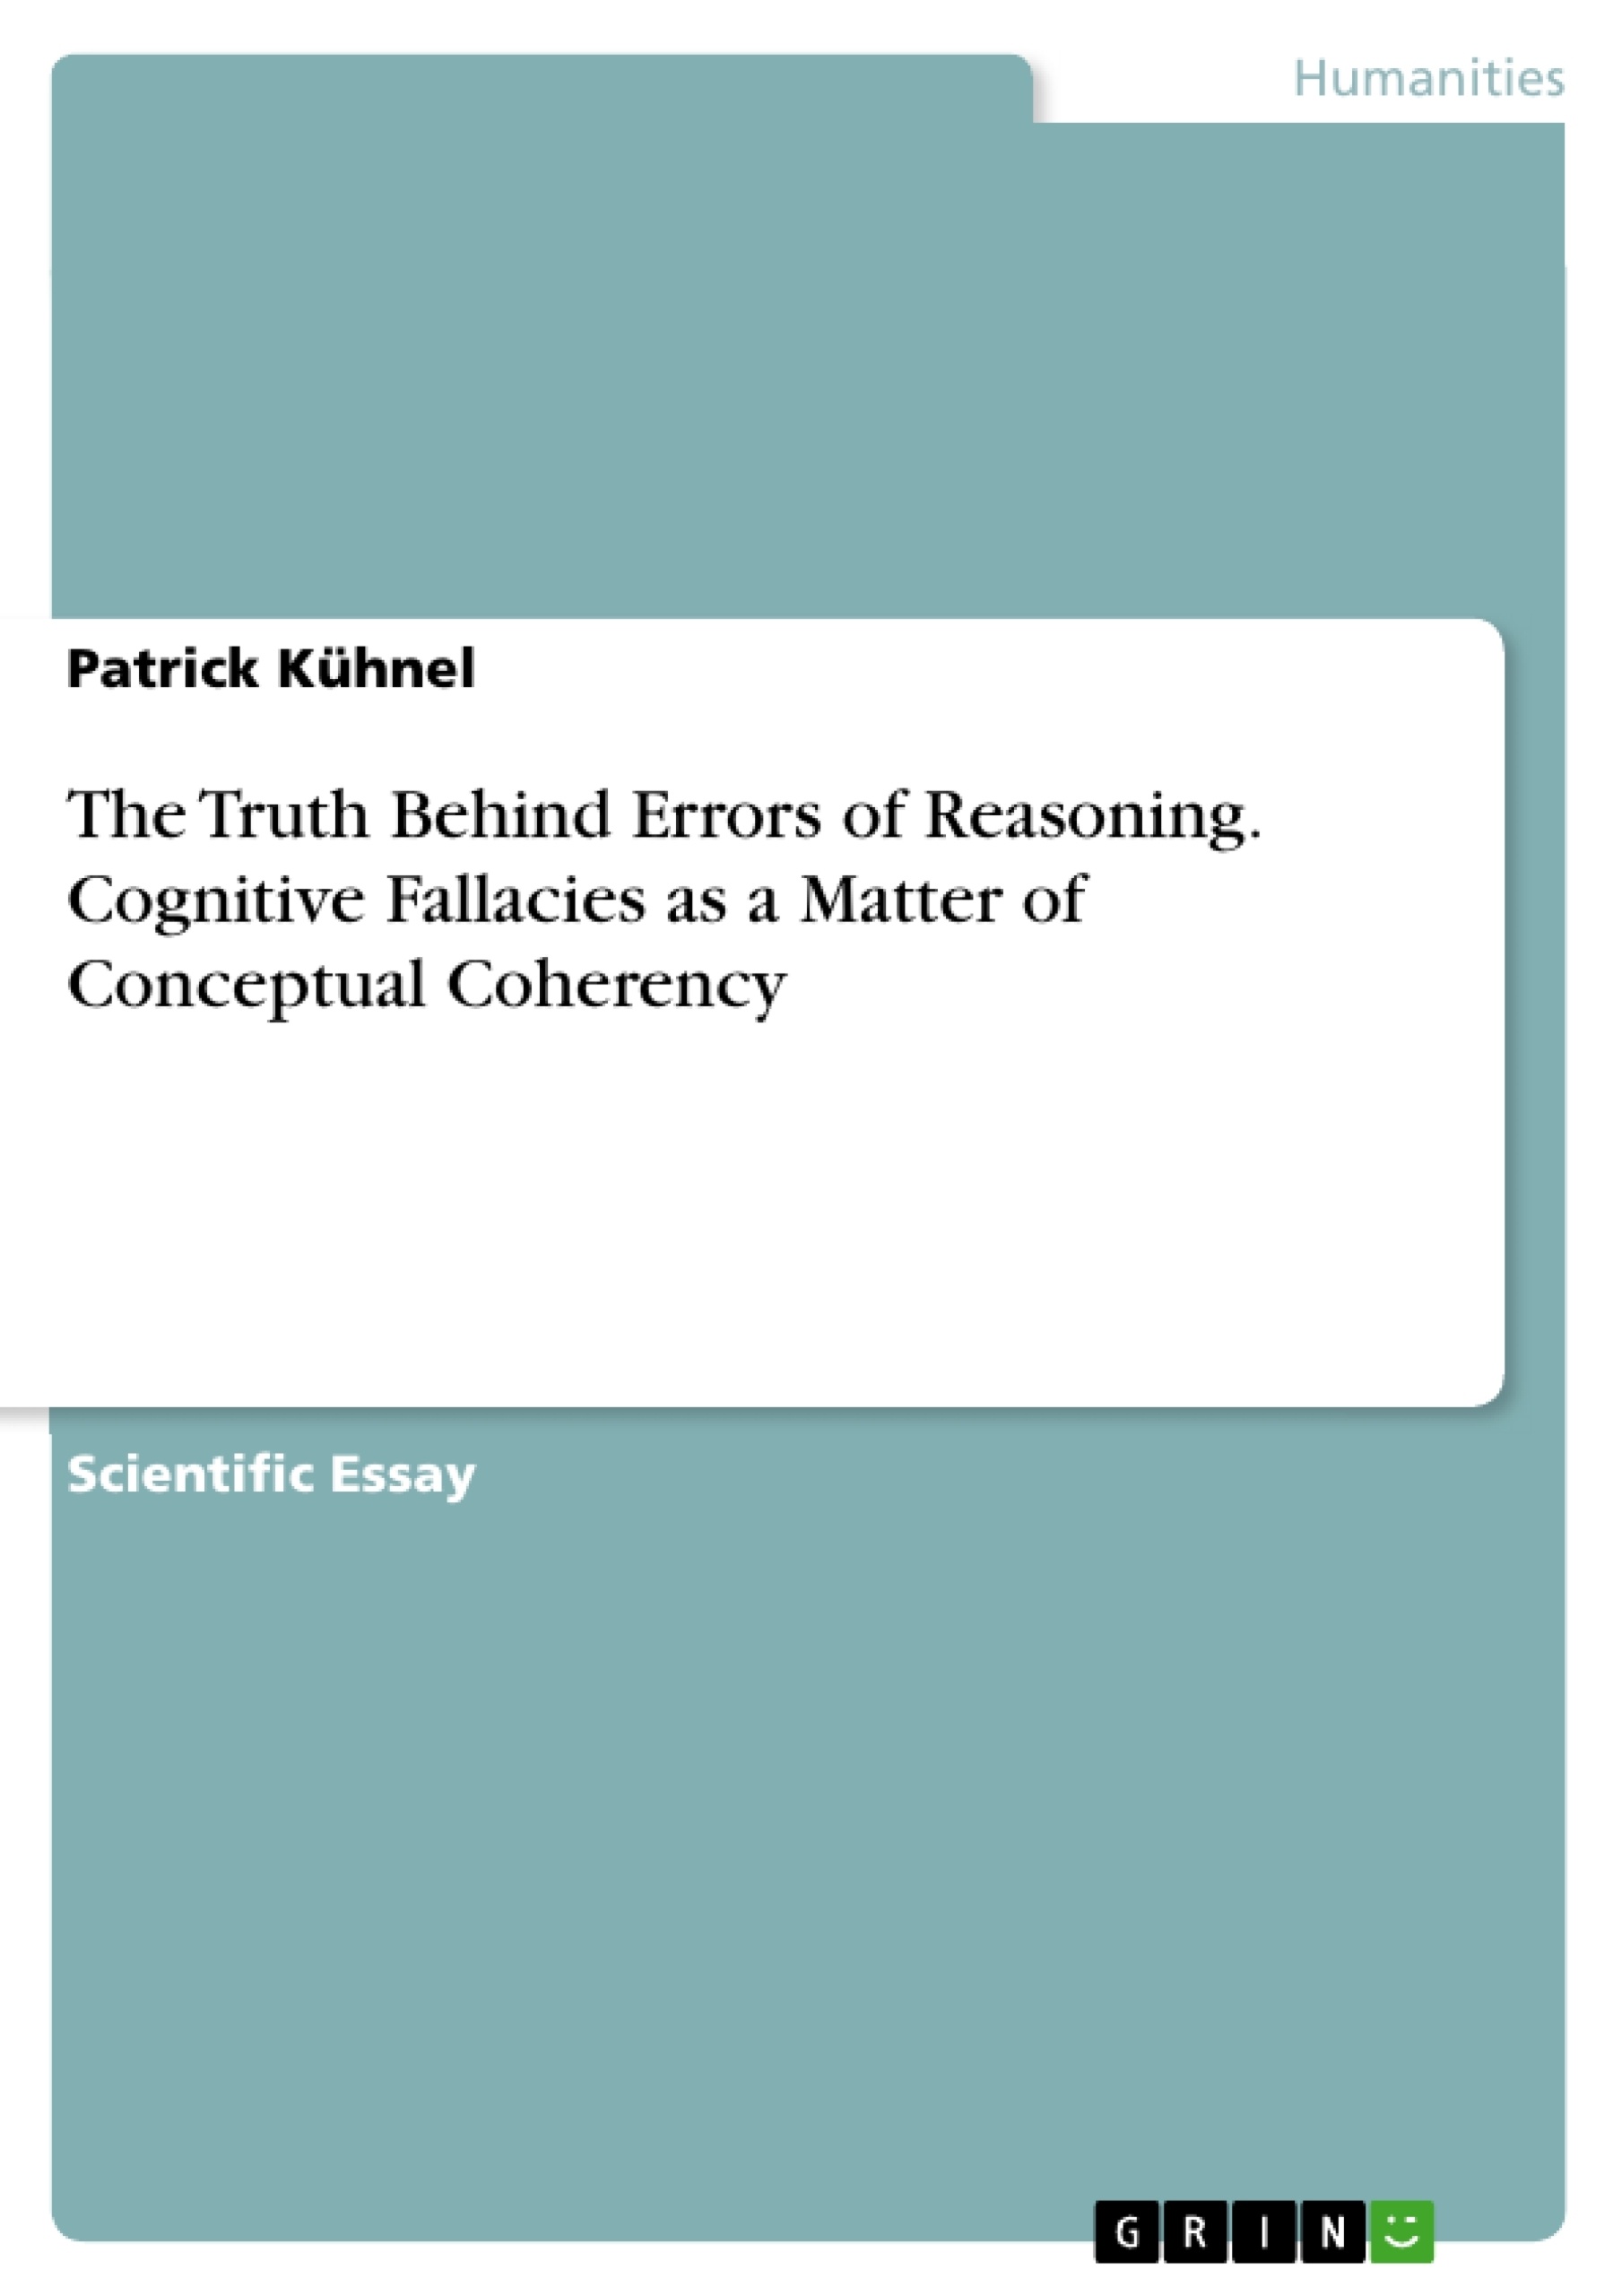 Titel: The Truth Behind Errors of Reasoning. Cognitive Fallacies as a Matter of Conceptual Coherency